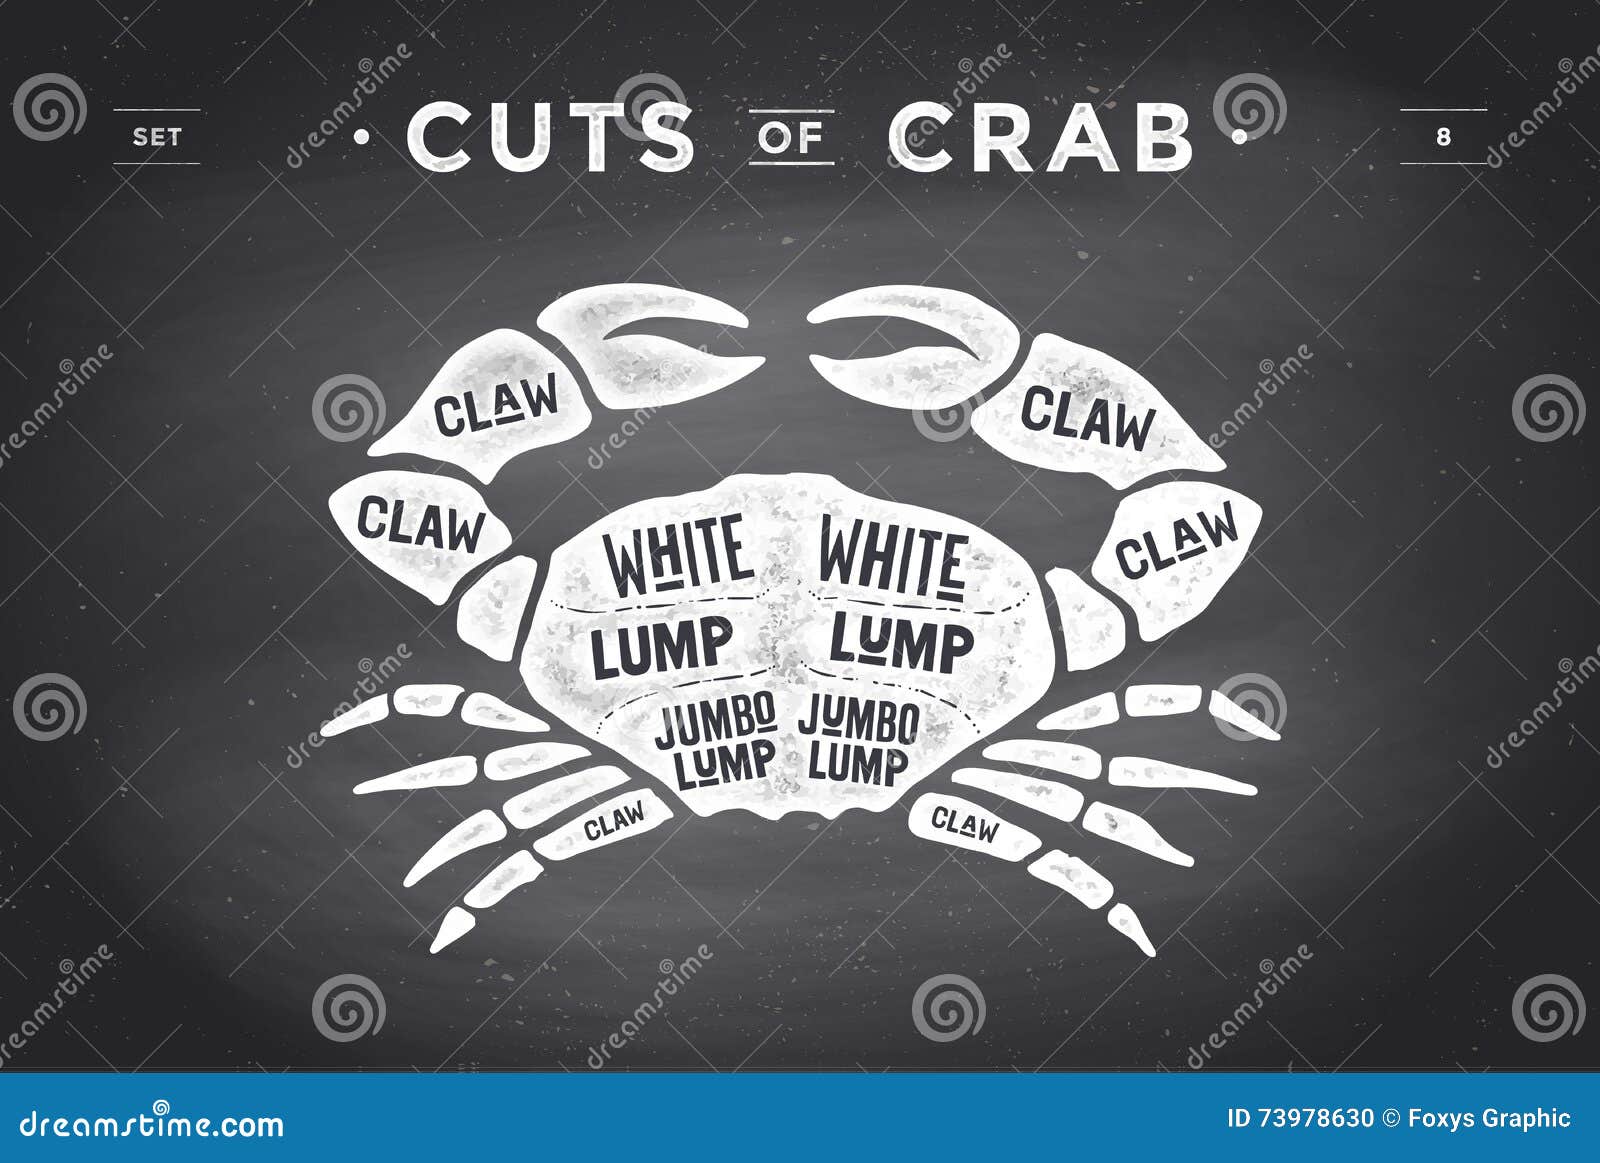 cut of meat set. poster butcher diagram and scheme - crab